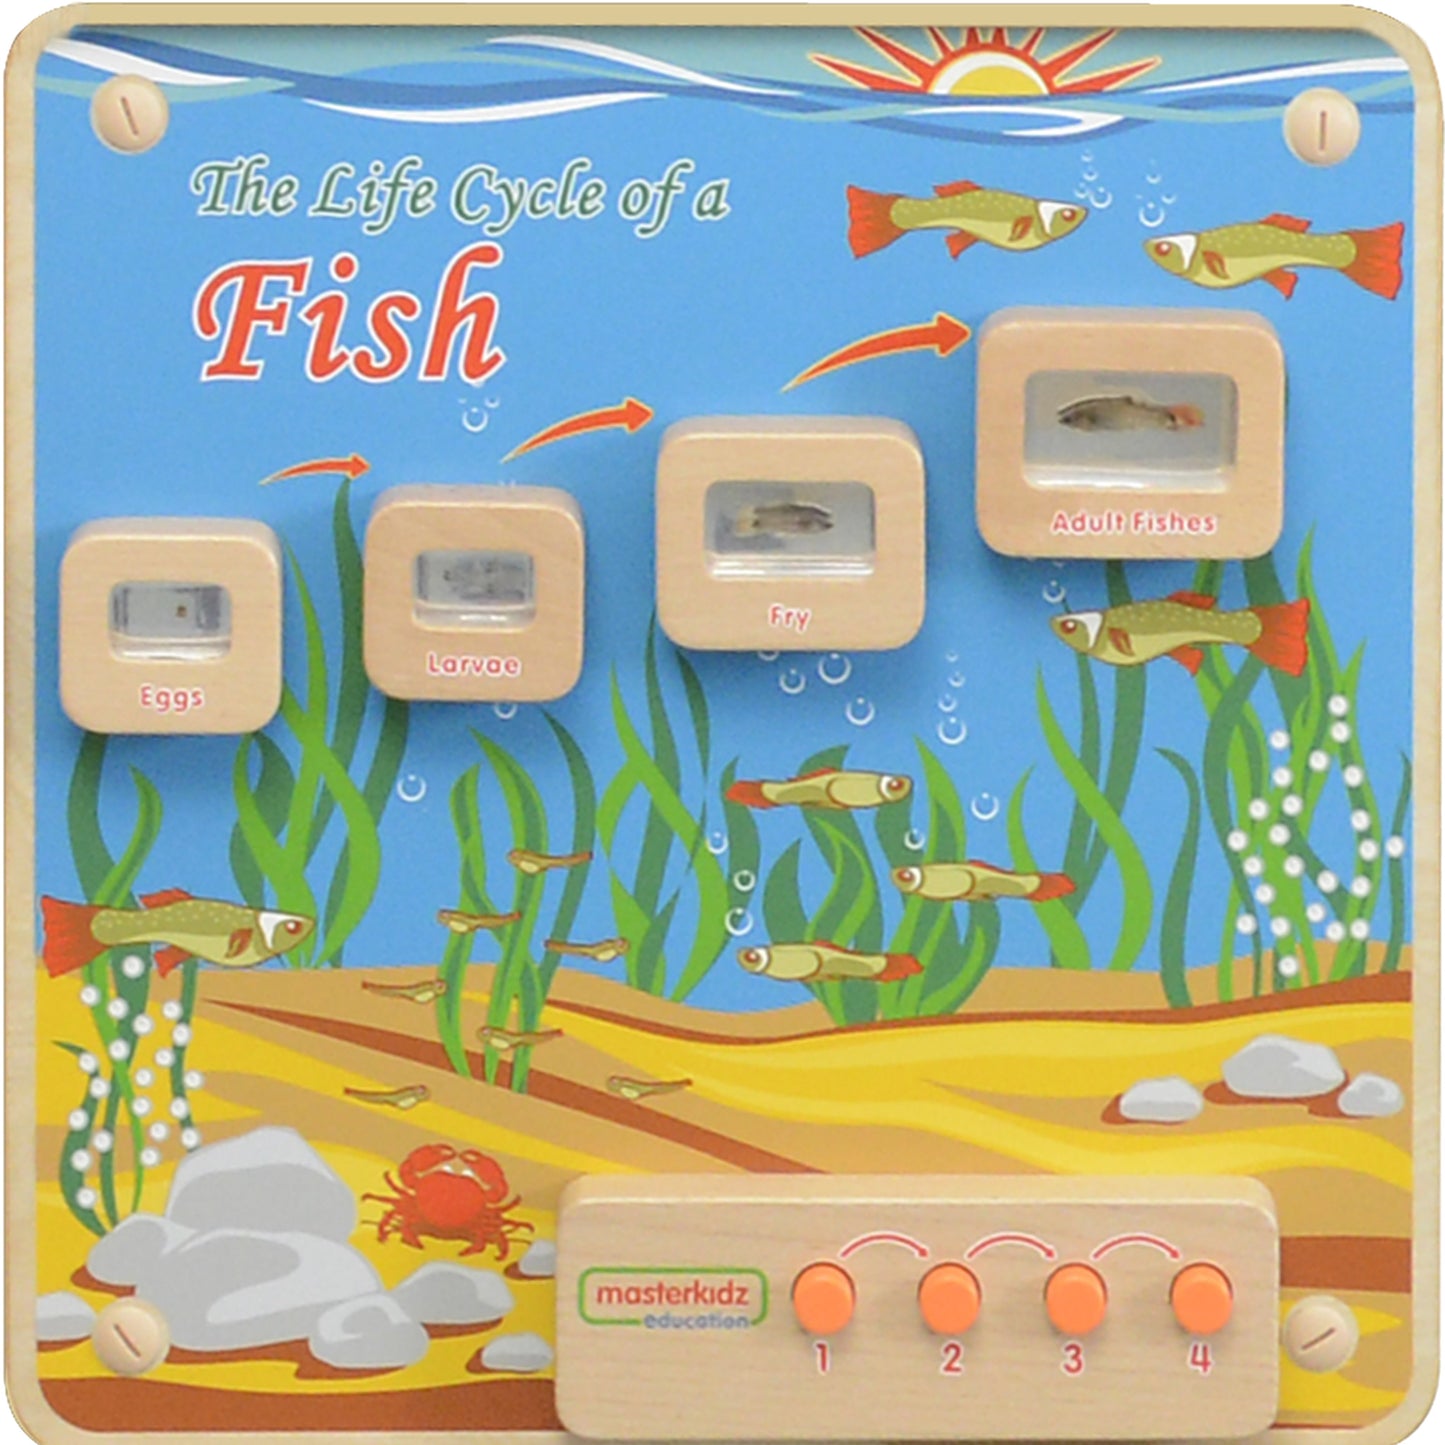 Masterkidz Wall Elements - Light-Up Fish Life Cycle Stages Panel 牆面遊戲-魚成長階段標本探索燈板